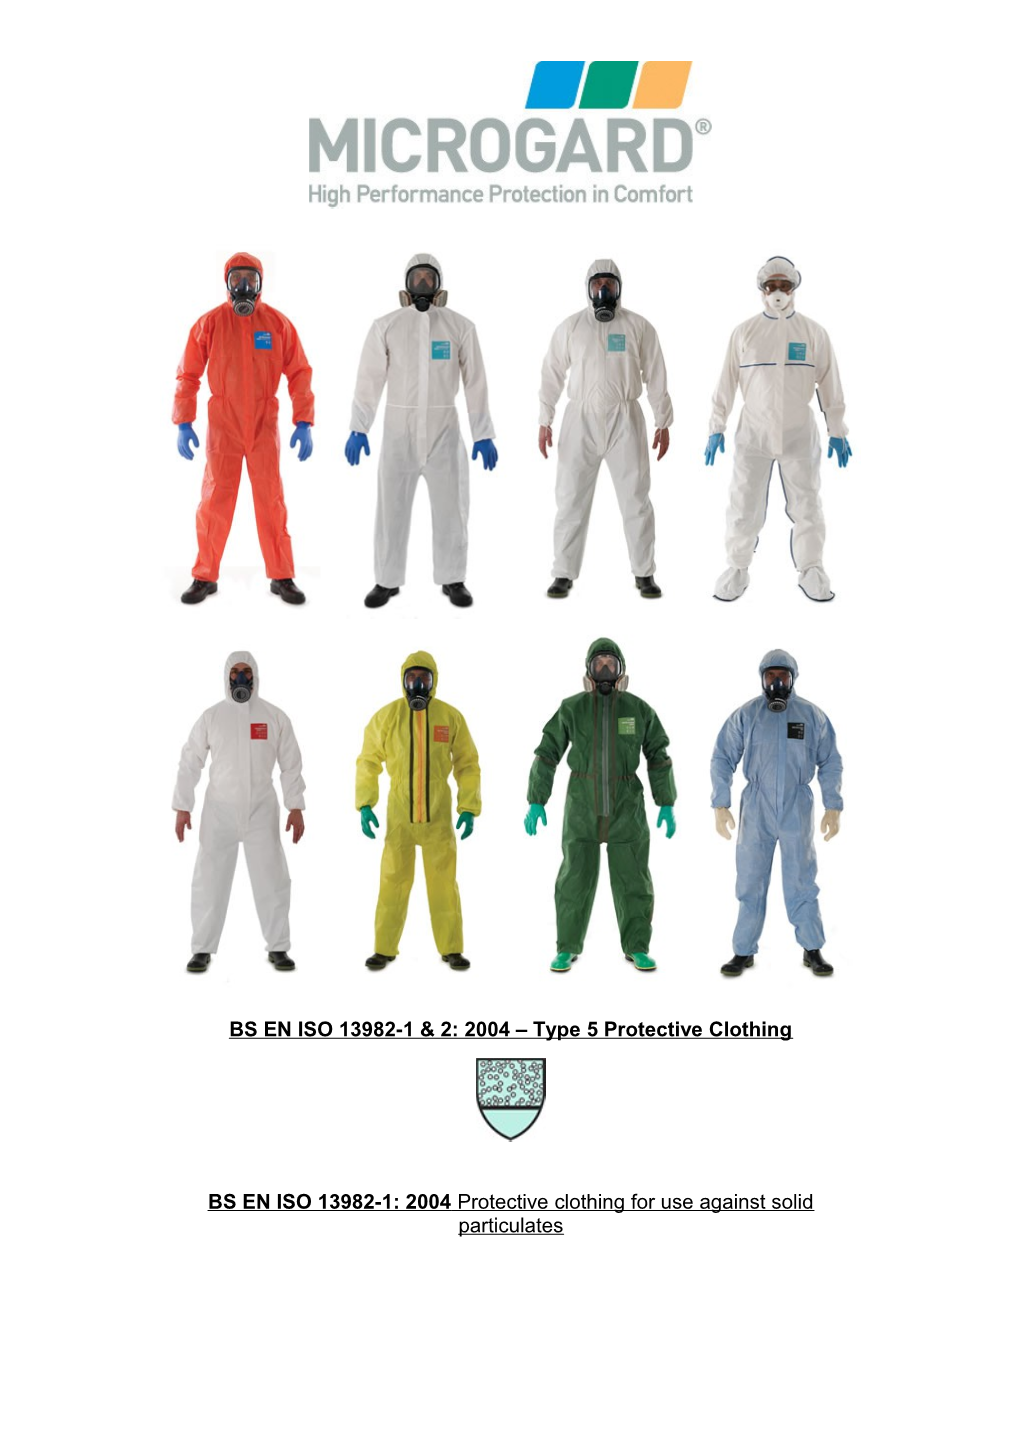 BS EN ISO 13982-1 & 2: 2004 Type 5 Protective Clothing